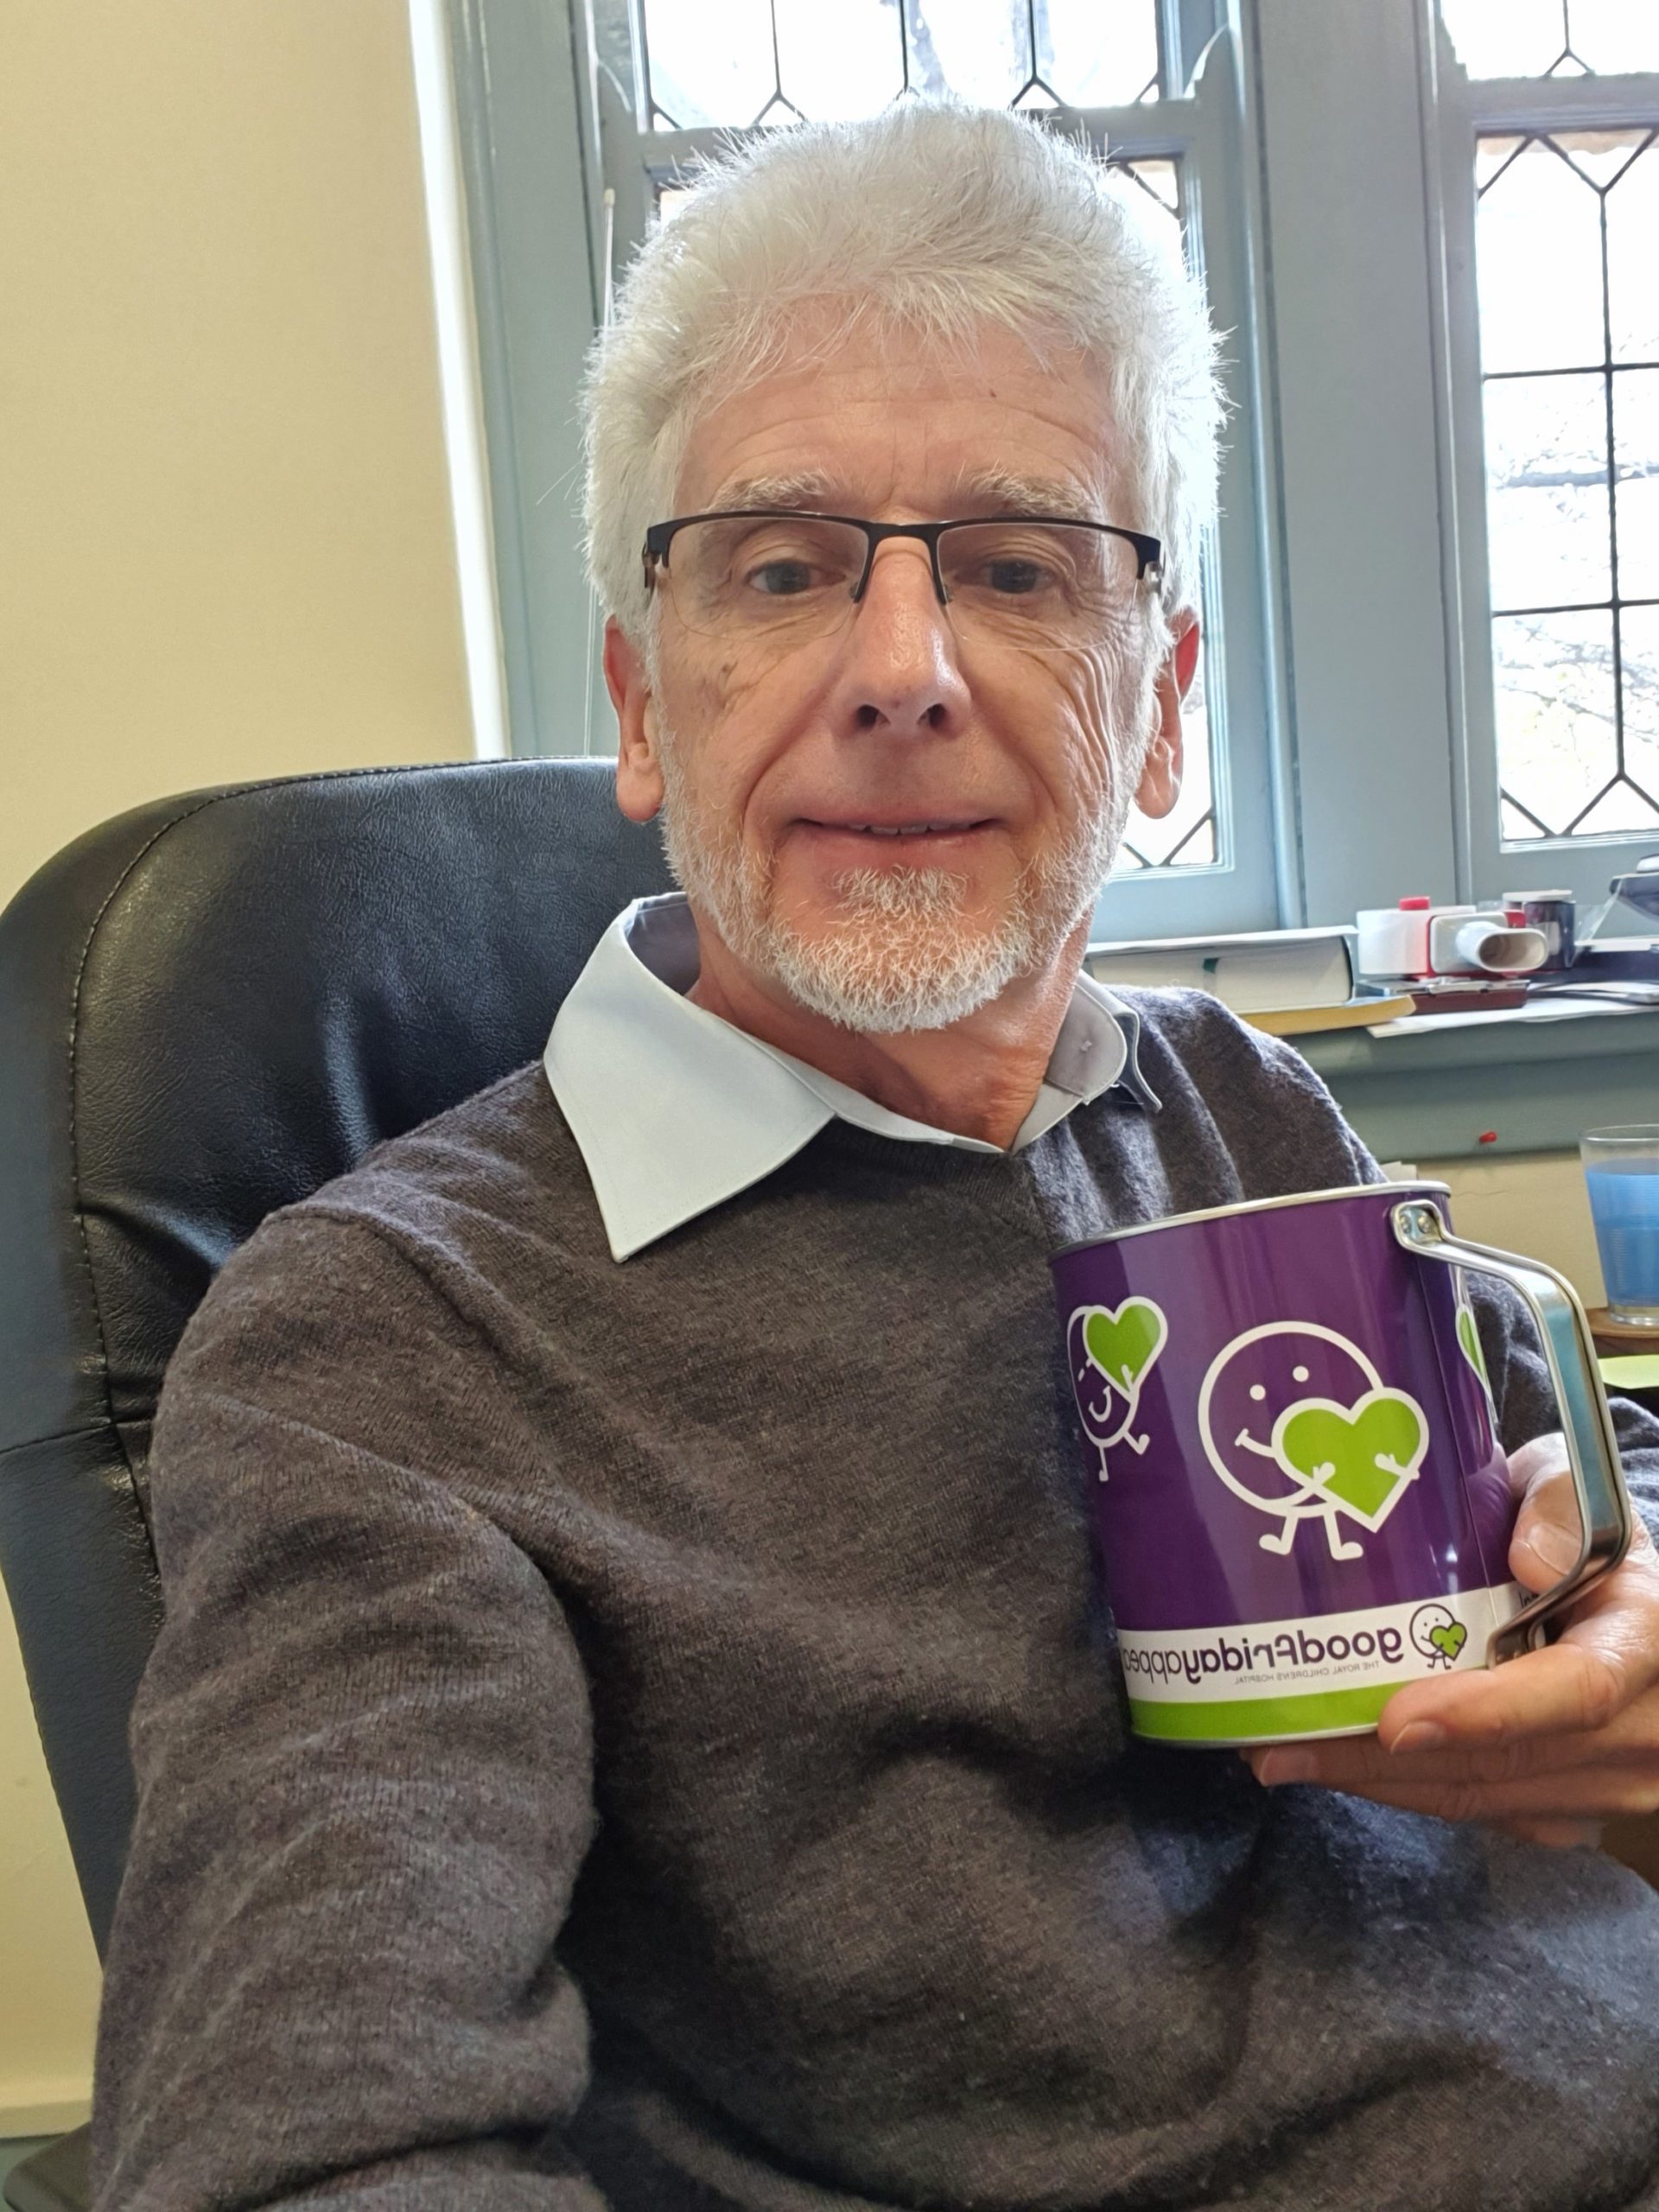 Phil sitting on a chair and holding a GFA purple collection tin